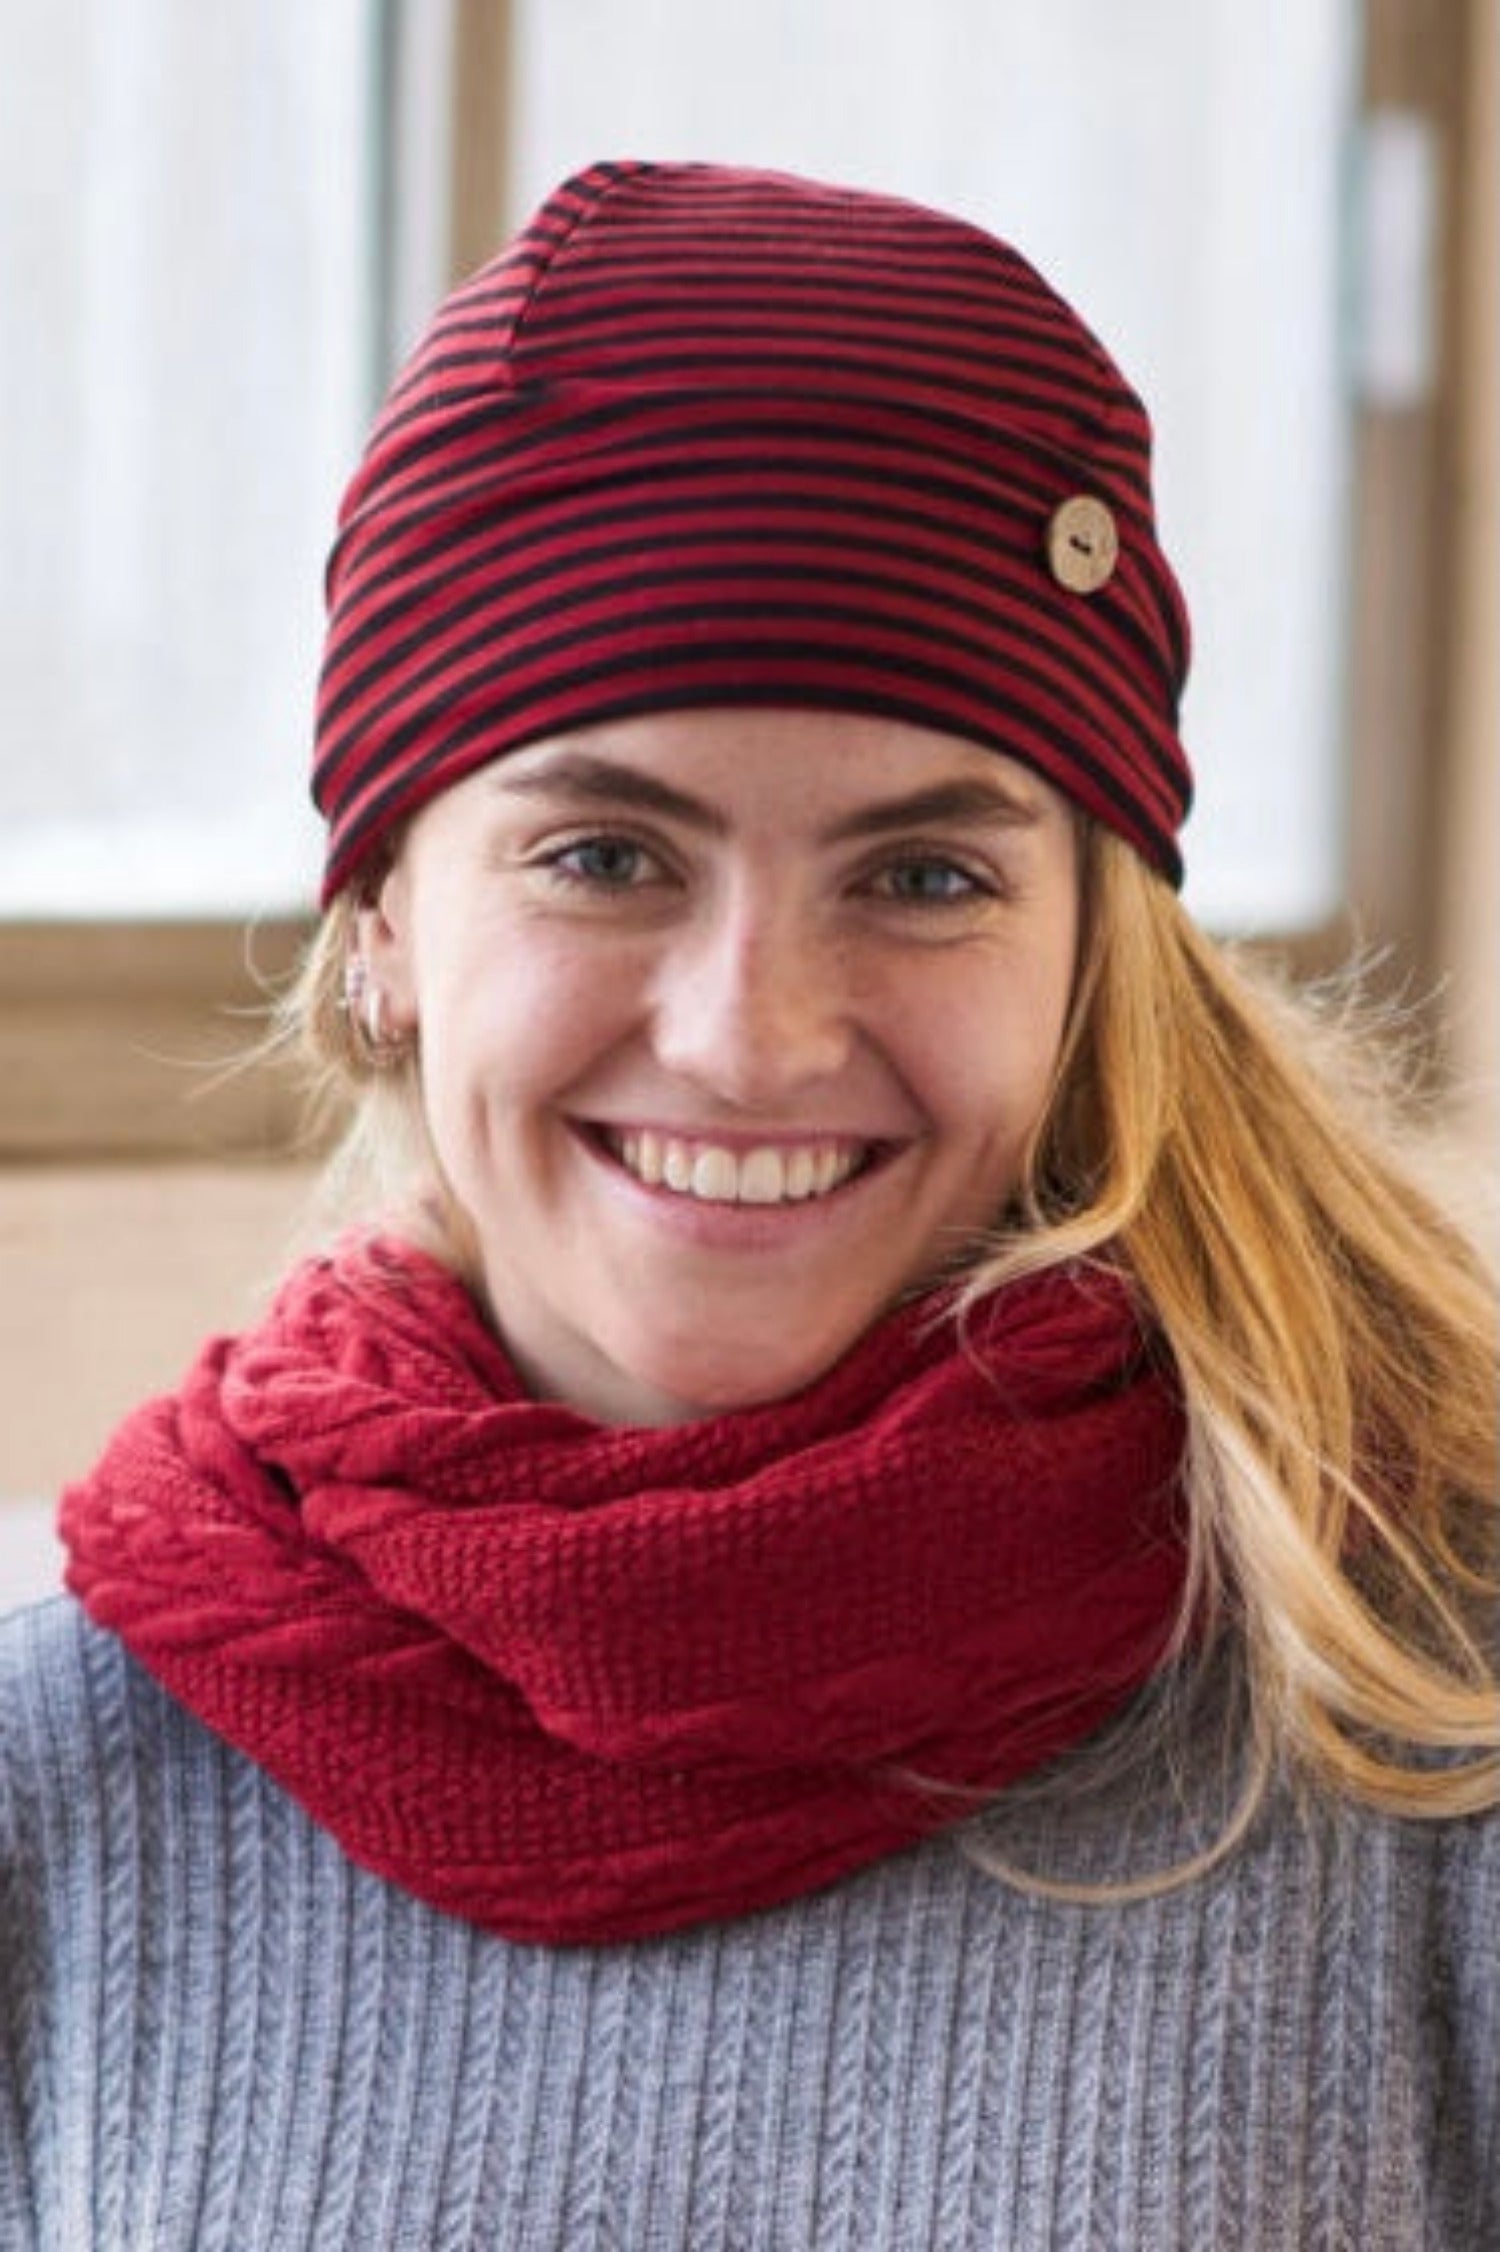 Infini Scarf by Rien ne se Perd, Red, cable knit, made in Quebec